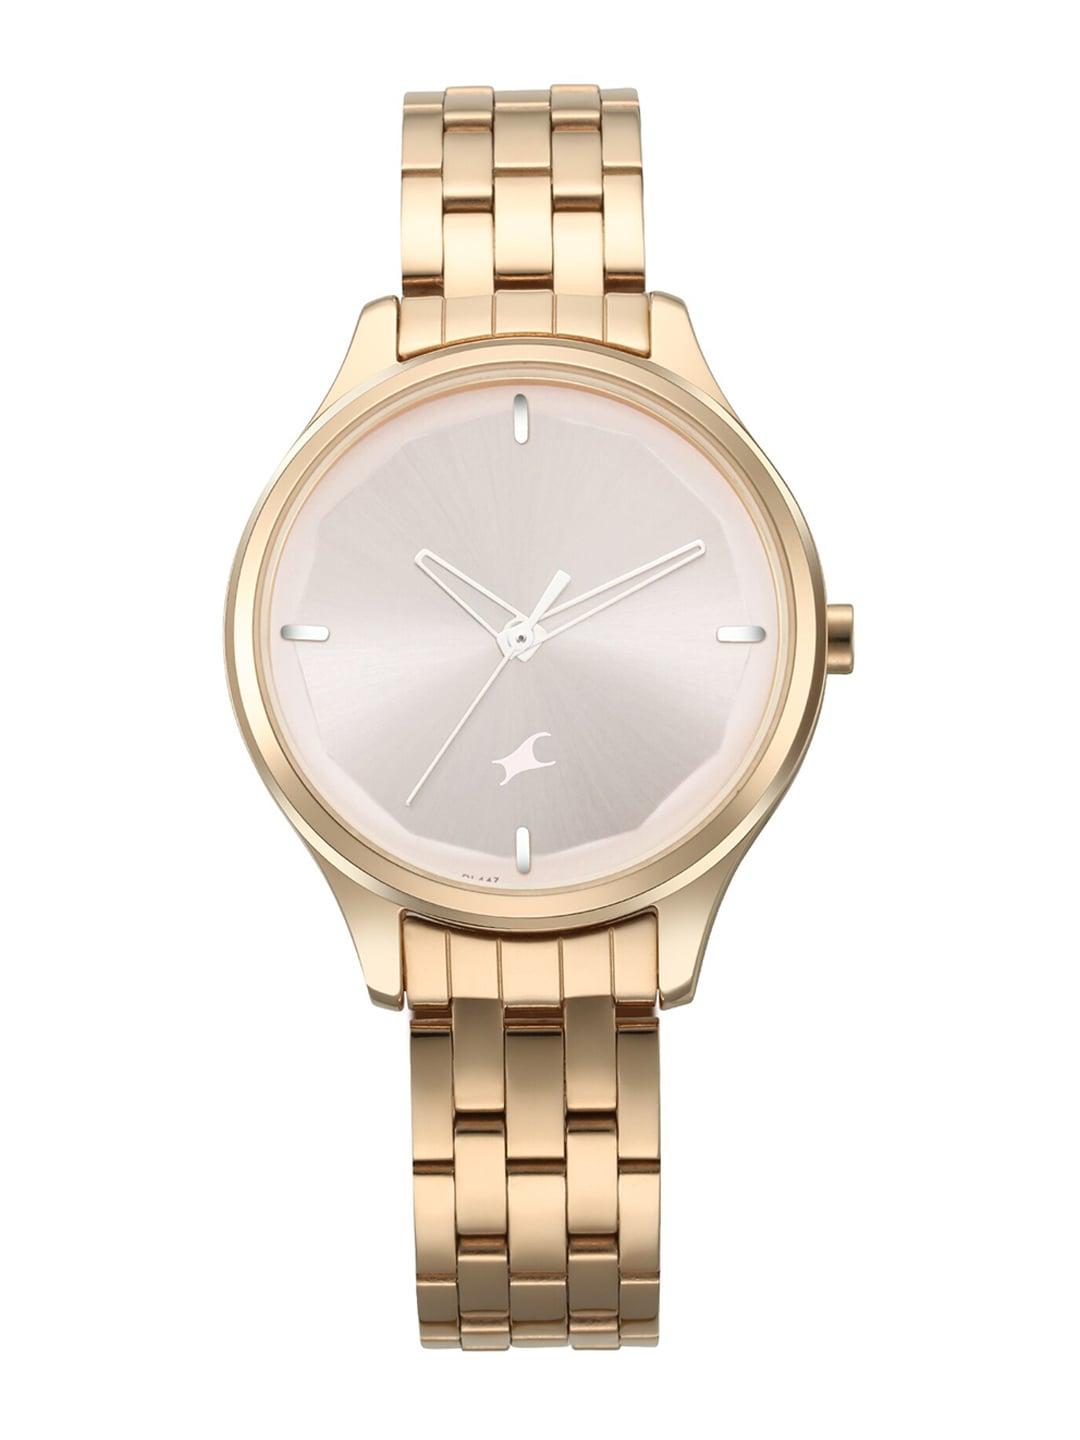 fastrack-stunners-1.0-women-rose-gold-toned-analogue-watch-6248wm01